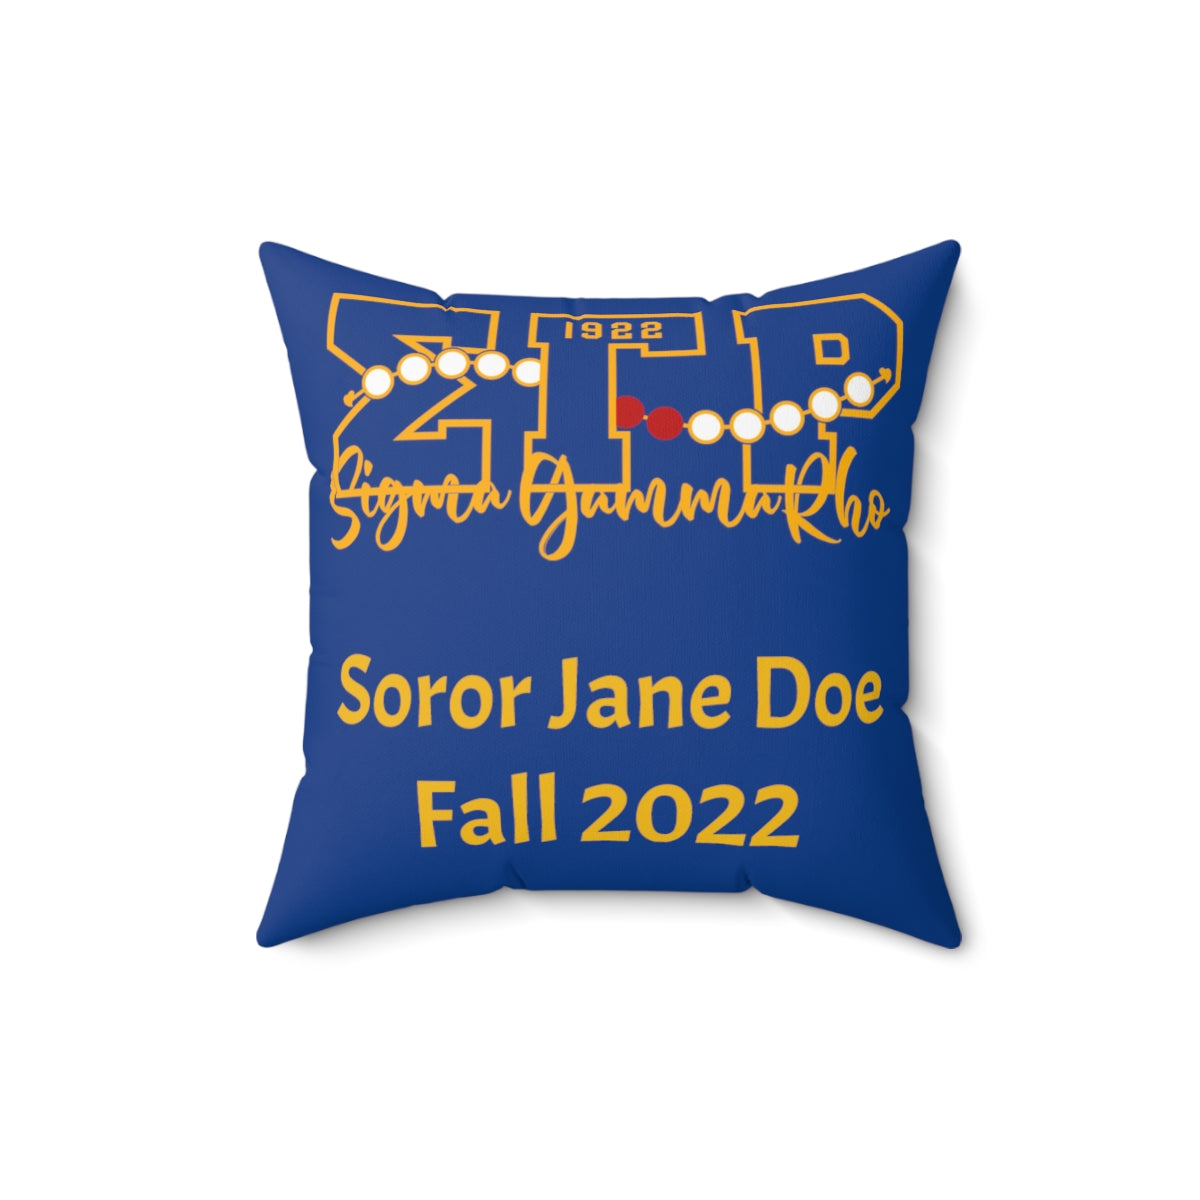 Sigma Gamma Rho Pearls and Rubies Faux Suede Square Pillow - FREE Personalization